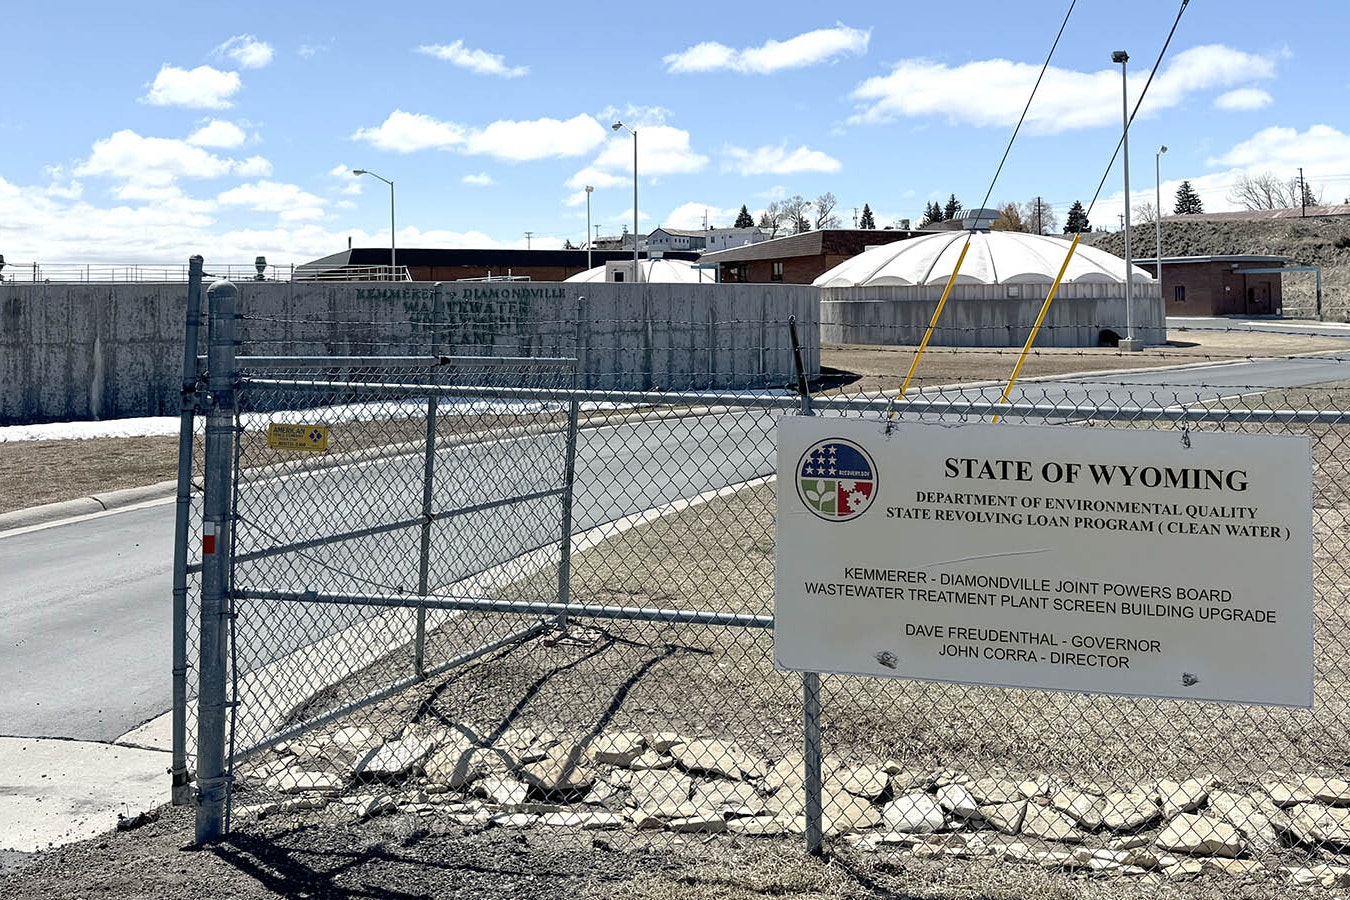 The sewage wastewater treatment plant for Kemmerer is 42 years old, and is likely to need to be replaced as part of a $40 million $50 million improvement to the region’s sewage needs.